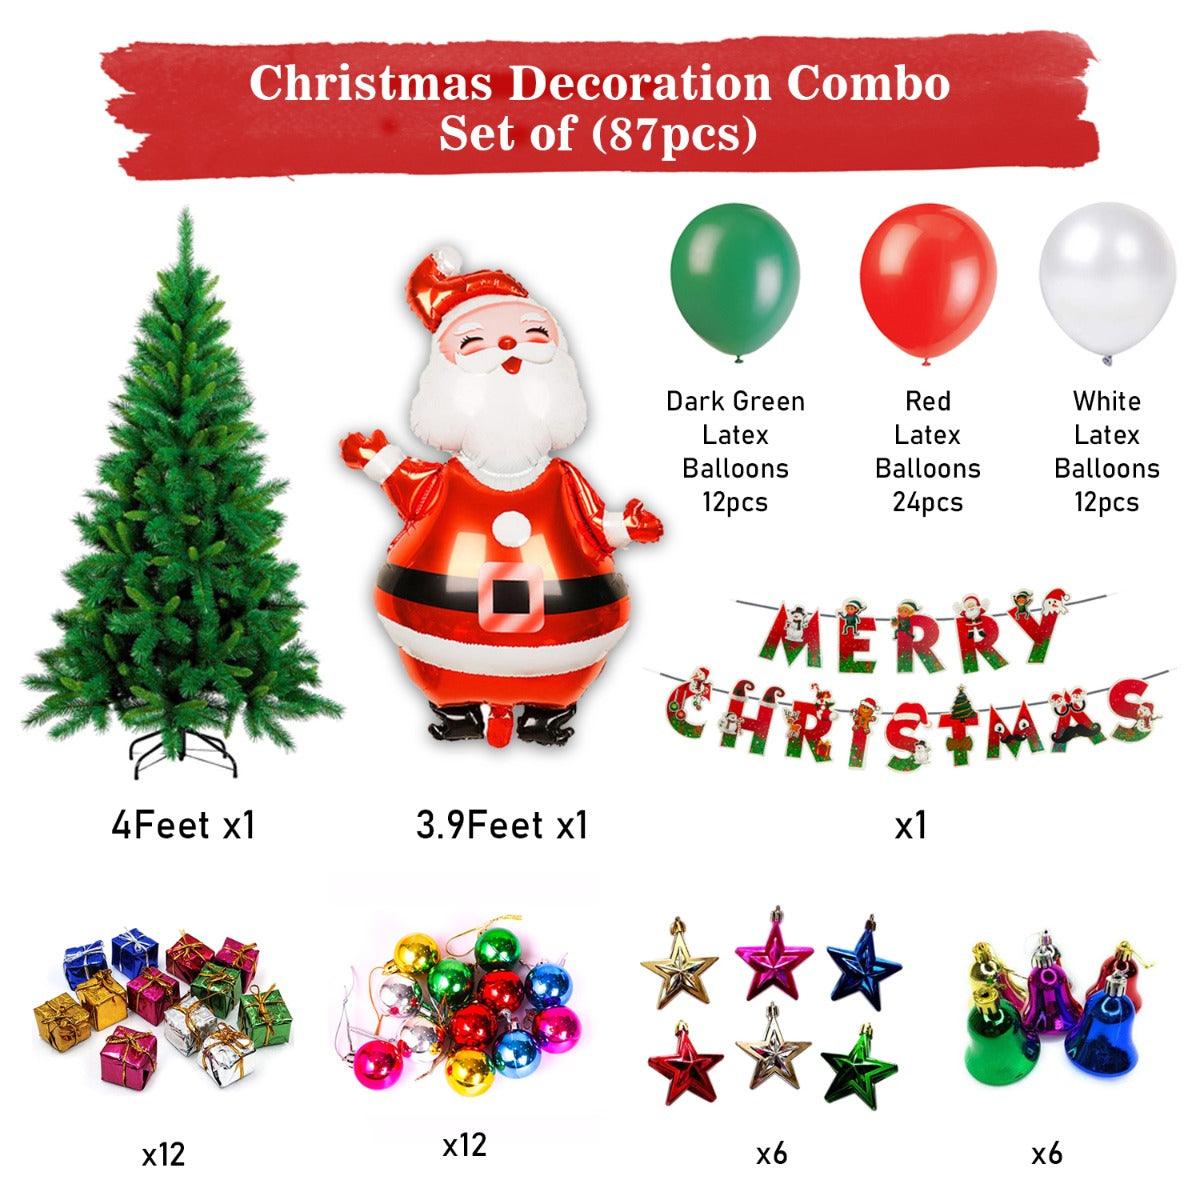 PartyCorp Merry Christmas Decoration Kit Combo 87 Pcs - Dark Green, Red, White Latex Balloons, Merry Christmas Printed Banner, Santa Foil Balloon, Christmas Tree 4 feet, 4 types of danglers (Stars, Bells, Balls, Gift boxes)